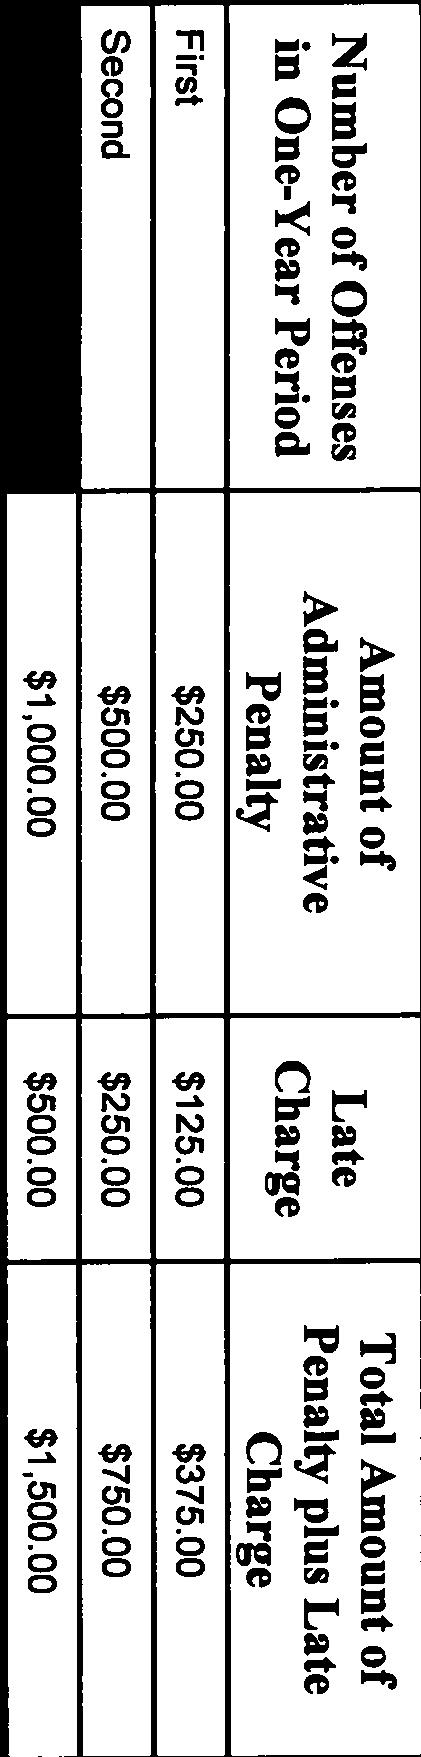 Number of Offenses in One-Year Period Amount of Administrative Penalty Late Total Amount of Penalty plus Late First $250.00 $125.00 $375.00 Second $500.00 $250.00 $750.